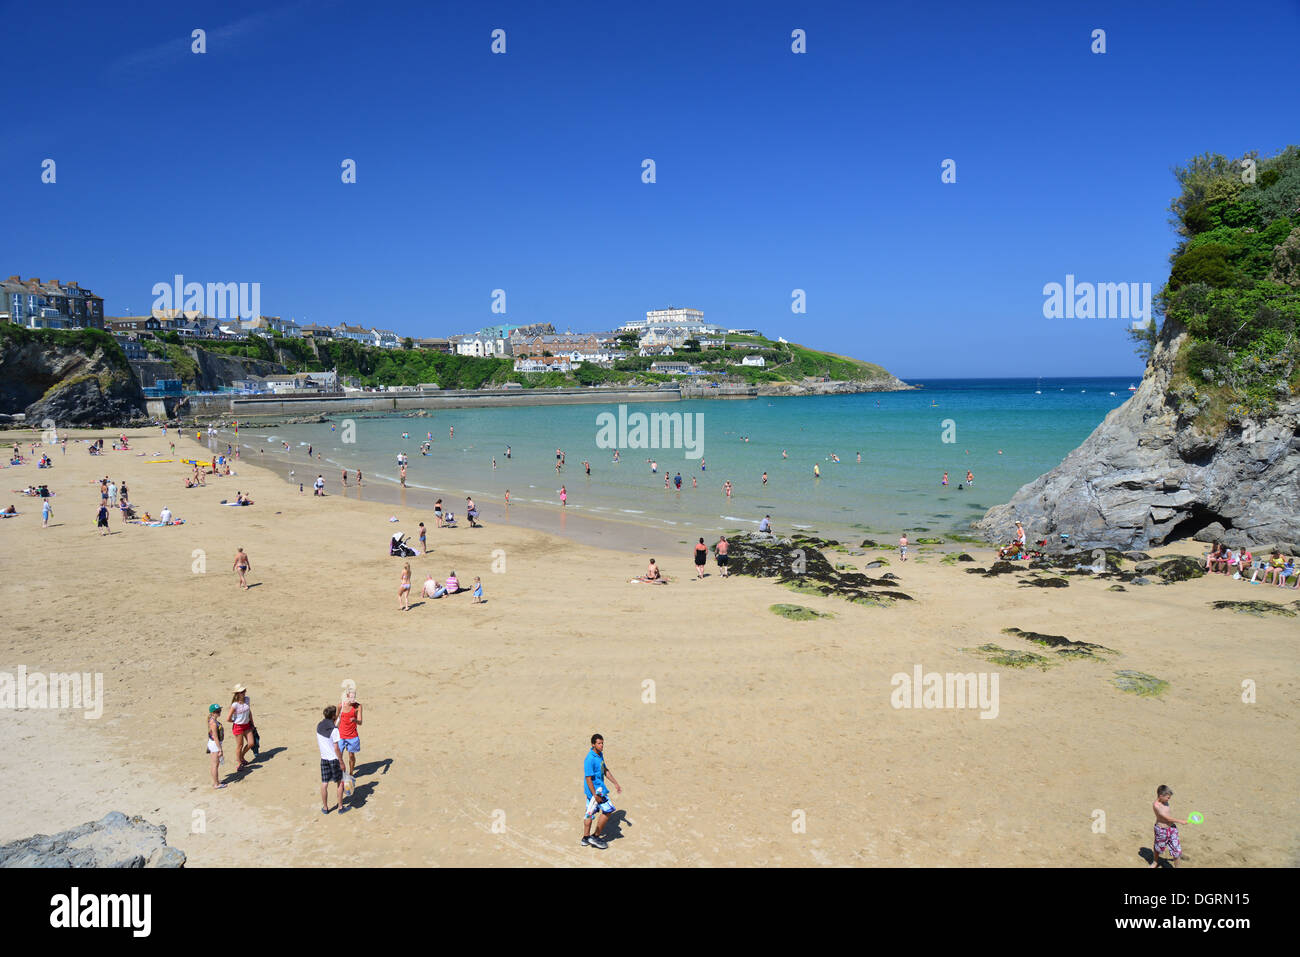 Plage de Towan, Newquay, Cornwall, Angleterre, Royaume-Uni Banque D'Images